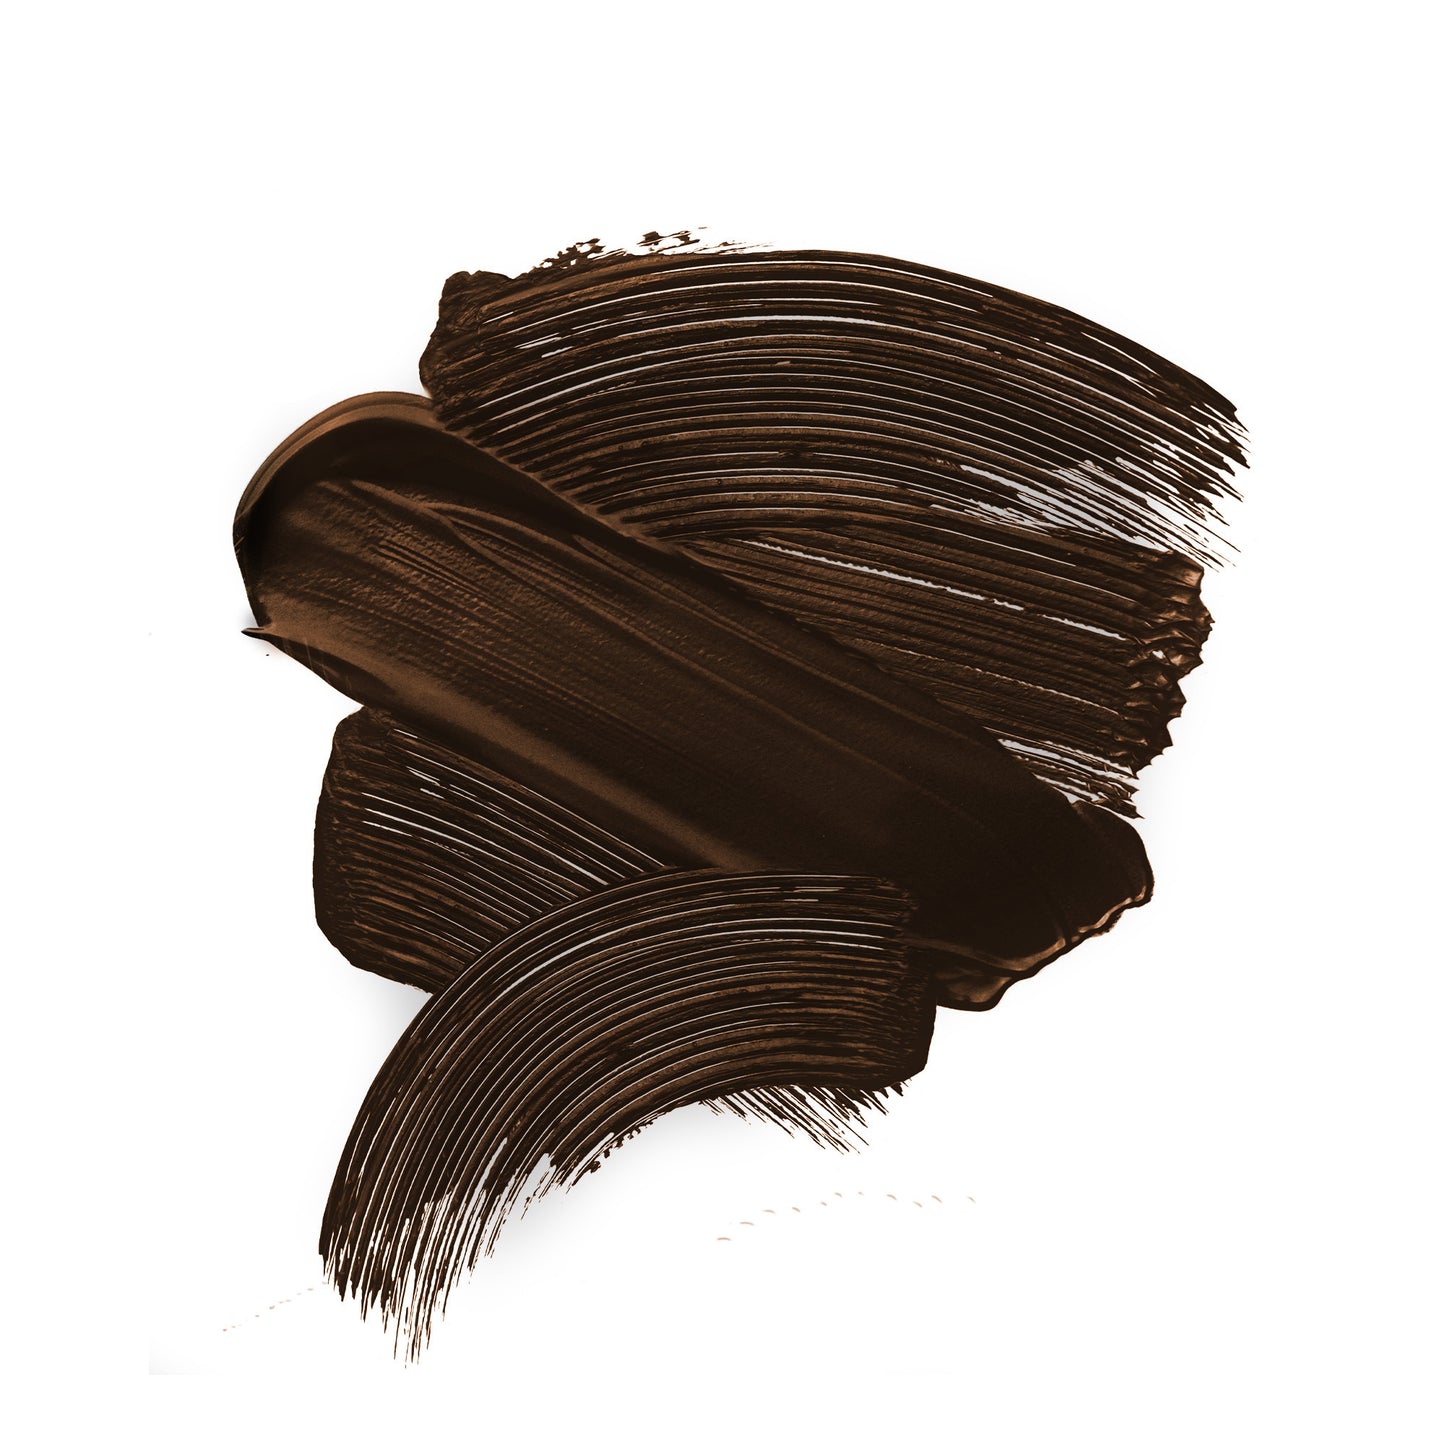 Swatch of Tinted Multi-Peptide Brow Gel - Color-Chocolate against a white background